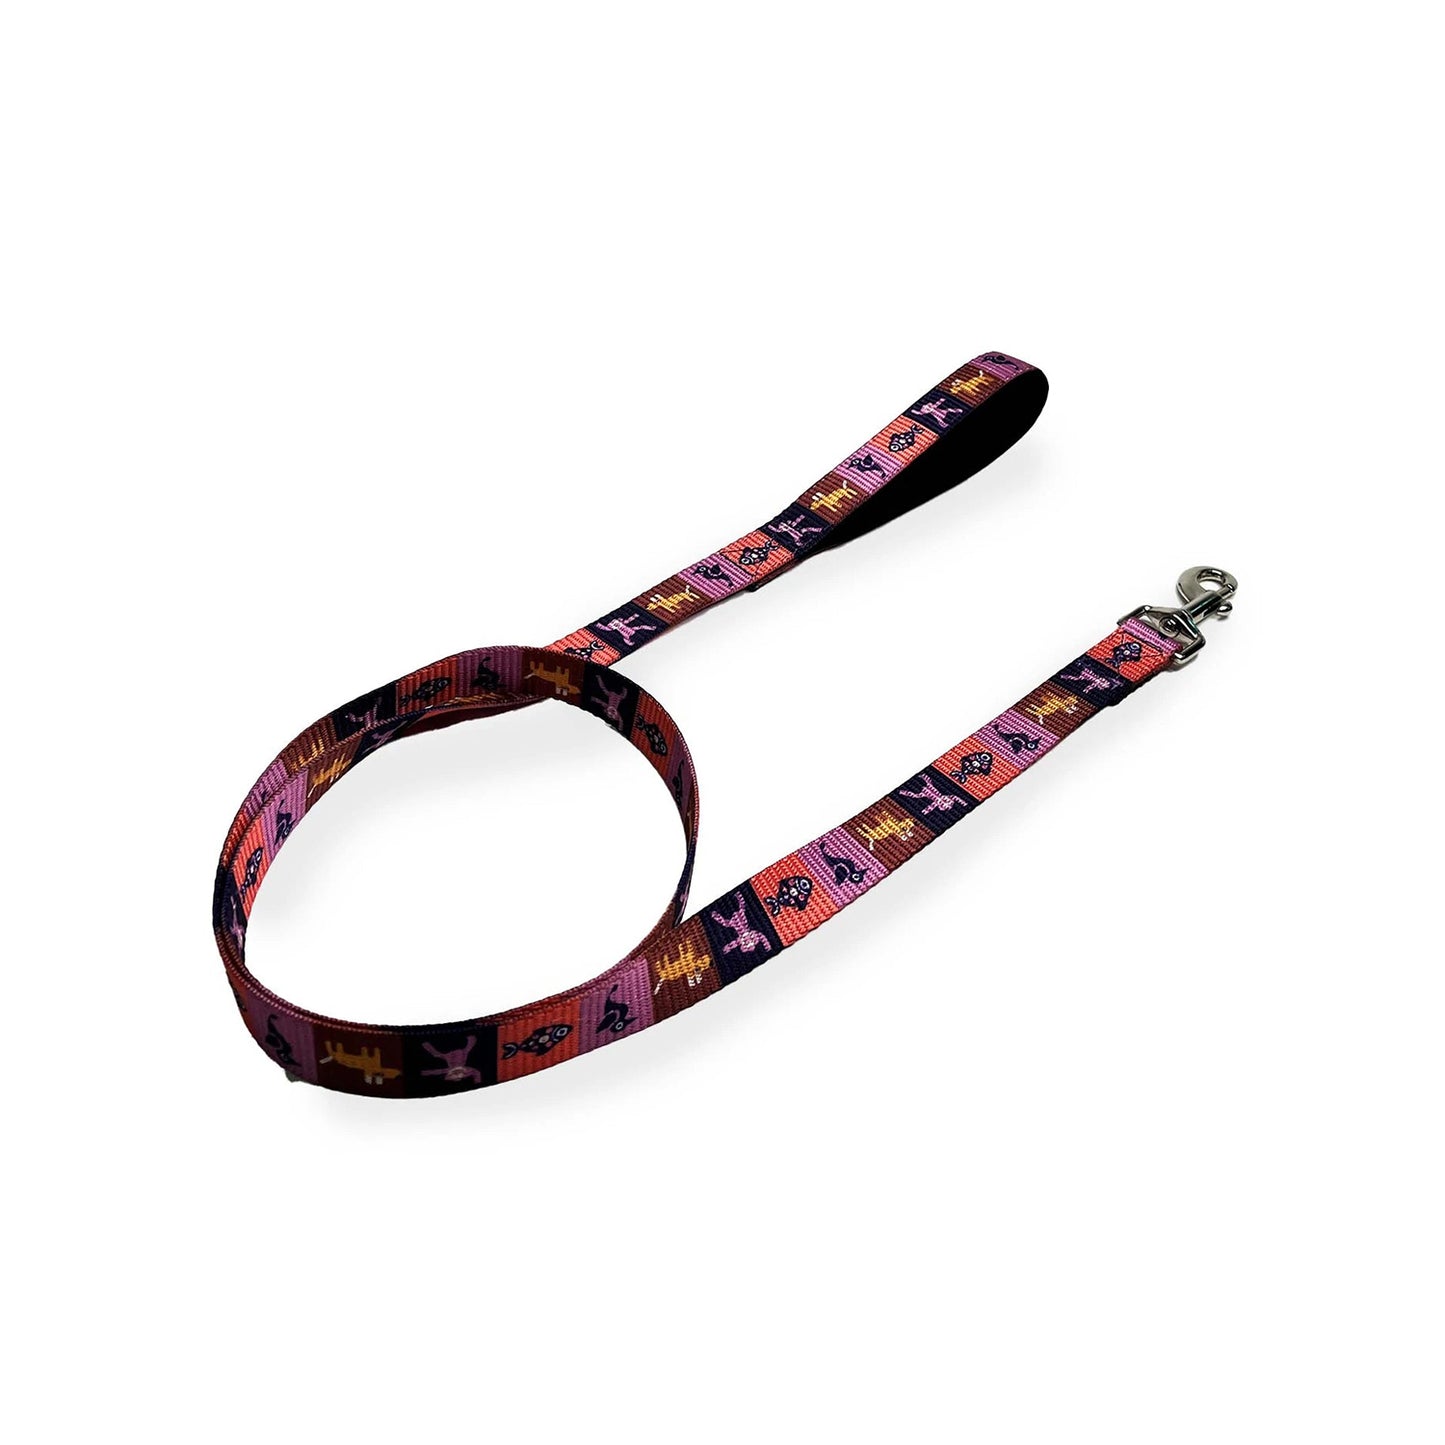 Forfurs - Zootopia Standard Leash For Dogs & Cats